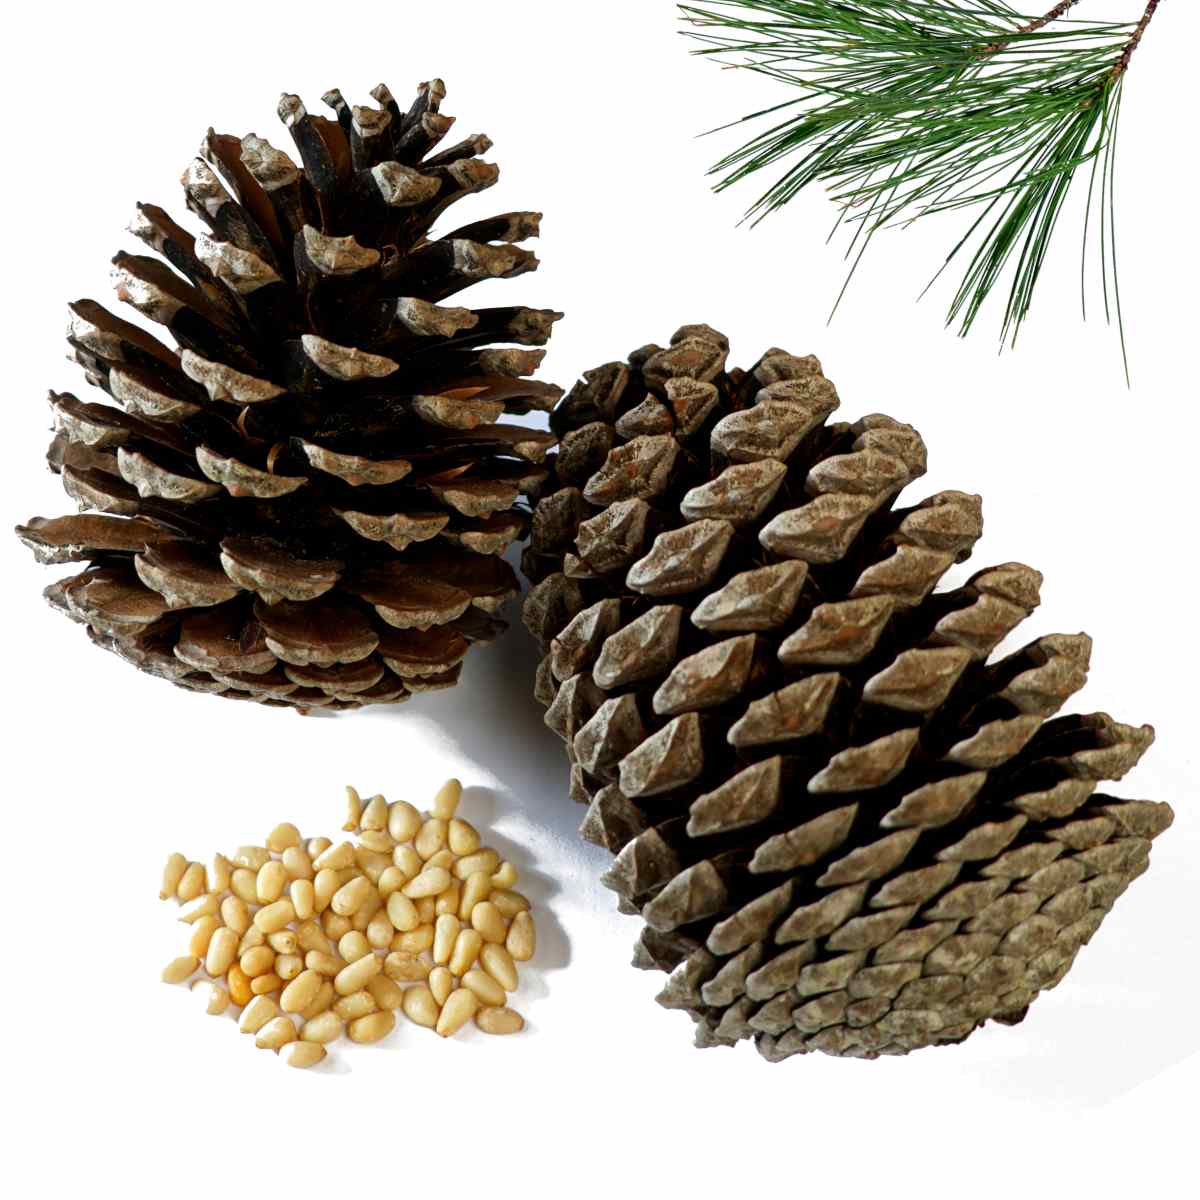 Where Do Pine Nuts Come From: Harvesting Pine Nuts From Pine Cones